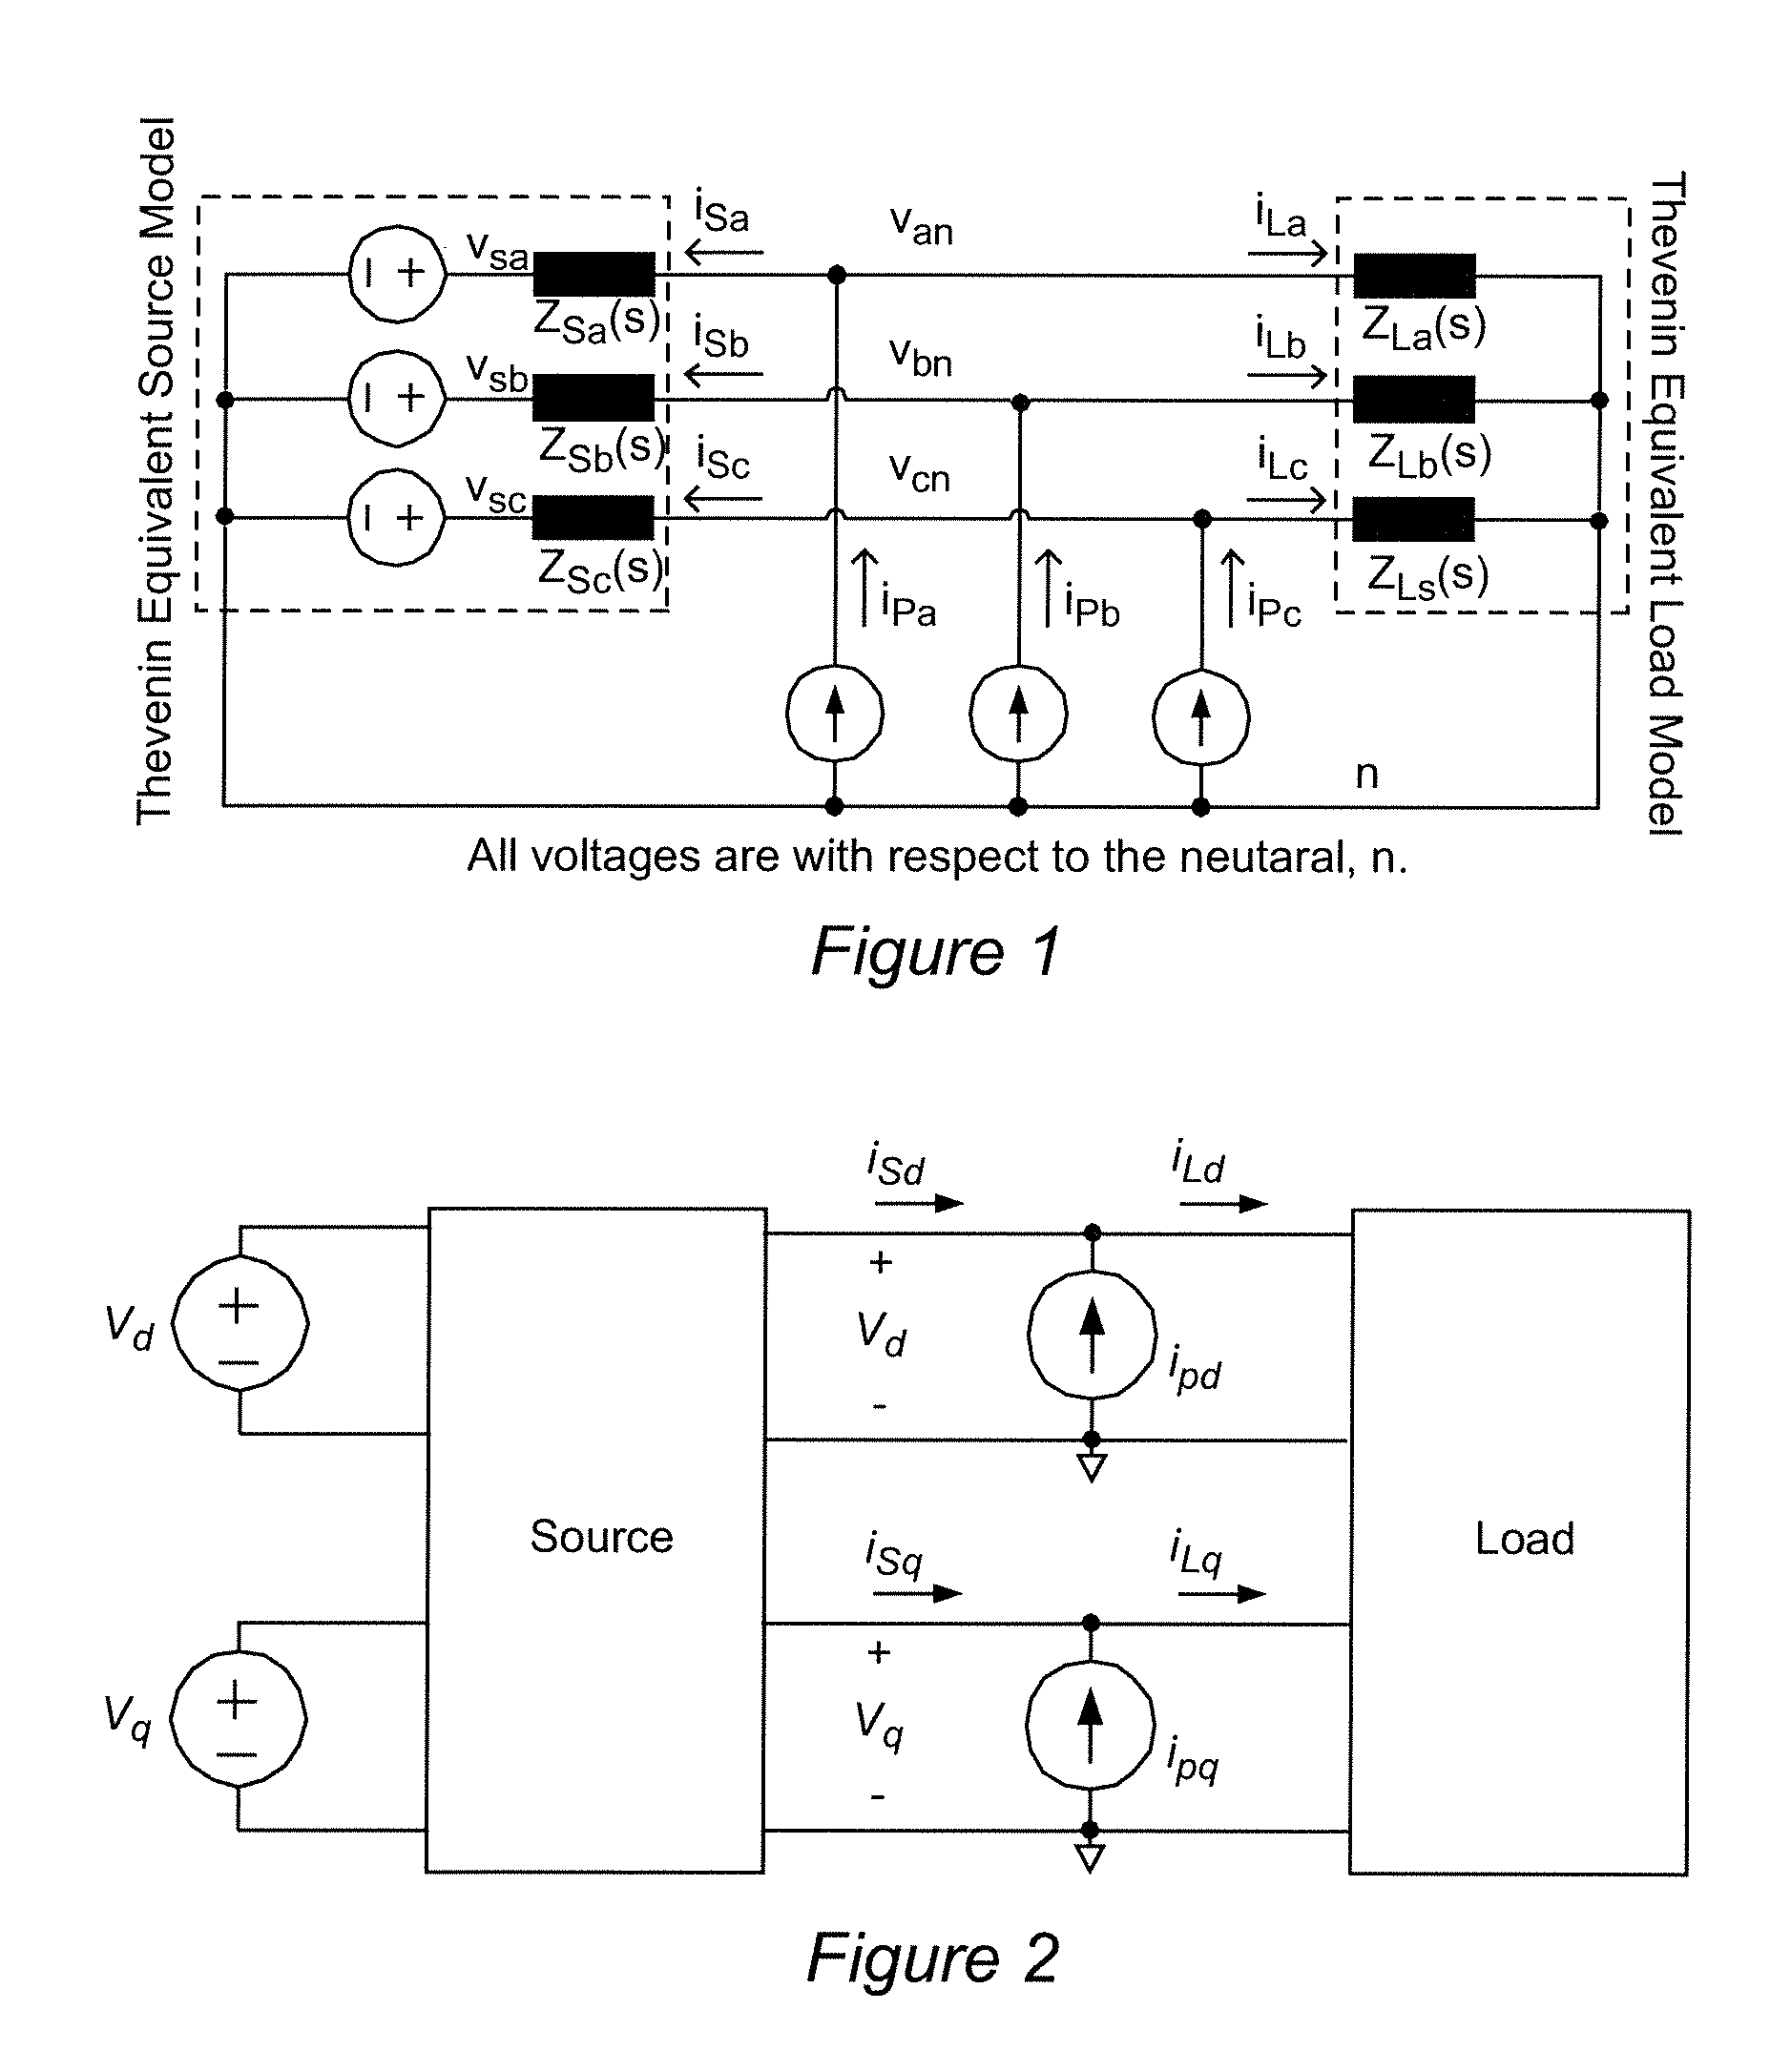 Algorithm and implementation system for measuring impedance in the d-q domain